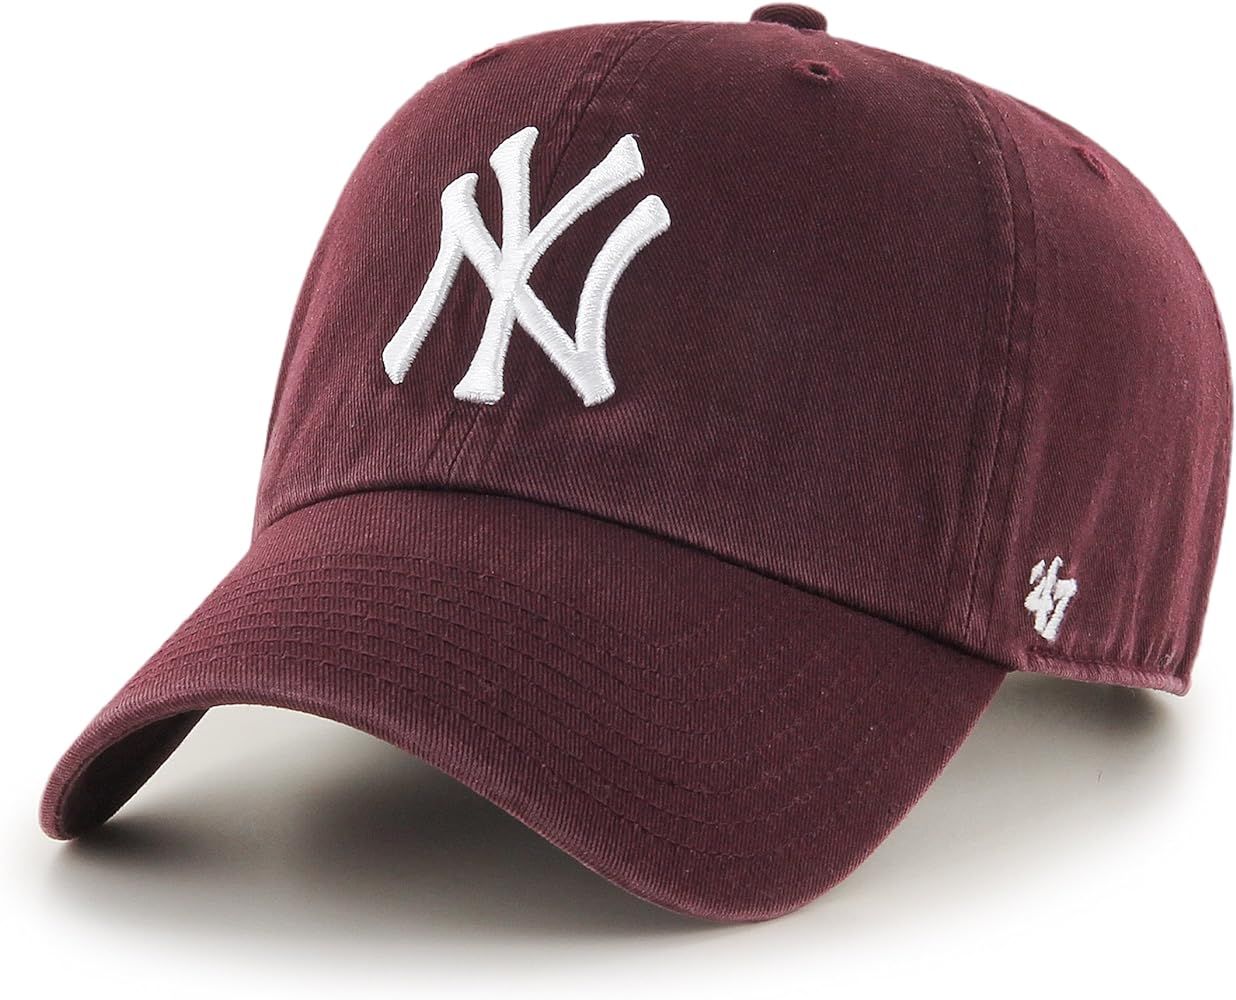 '47 MLB Mens Men's Brand Clean Up Cap One-Size | Amazon (US)